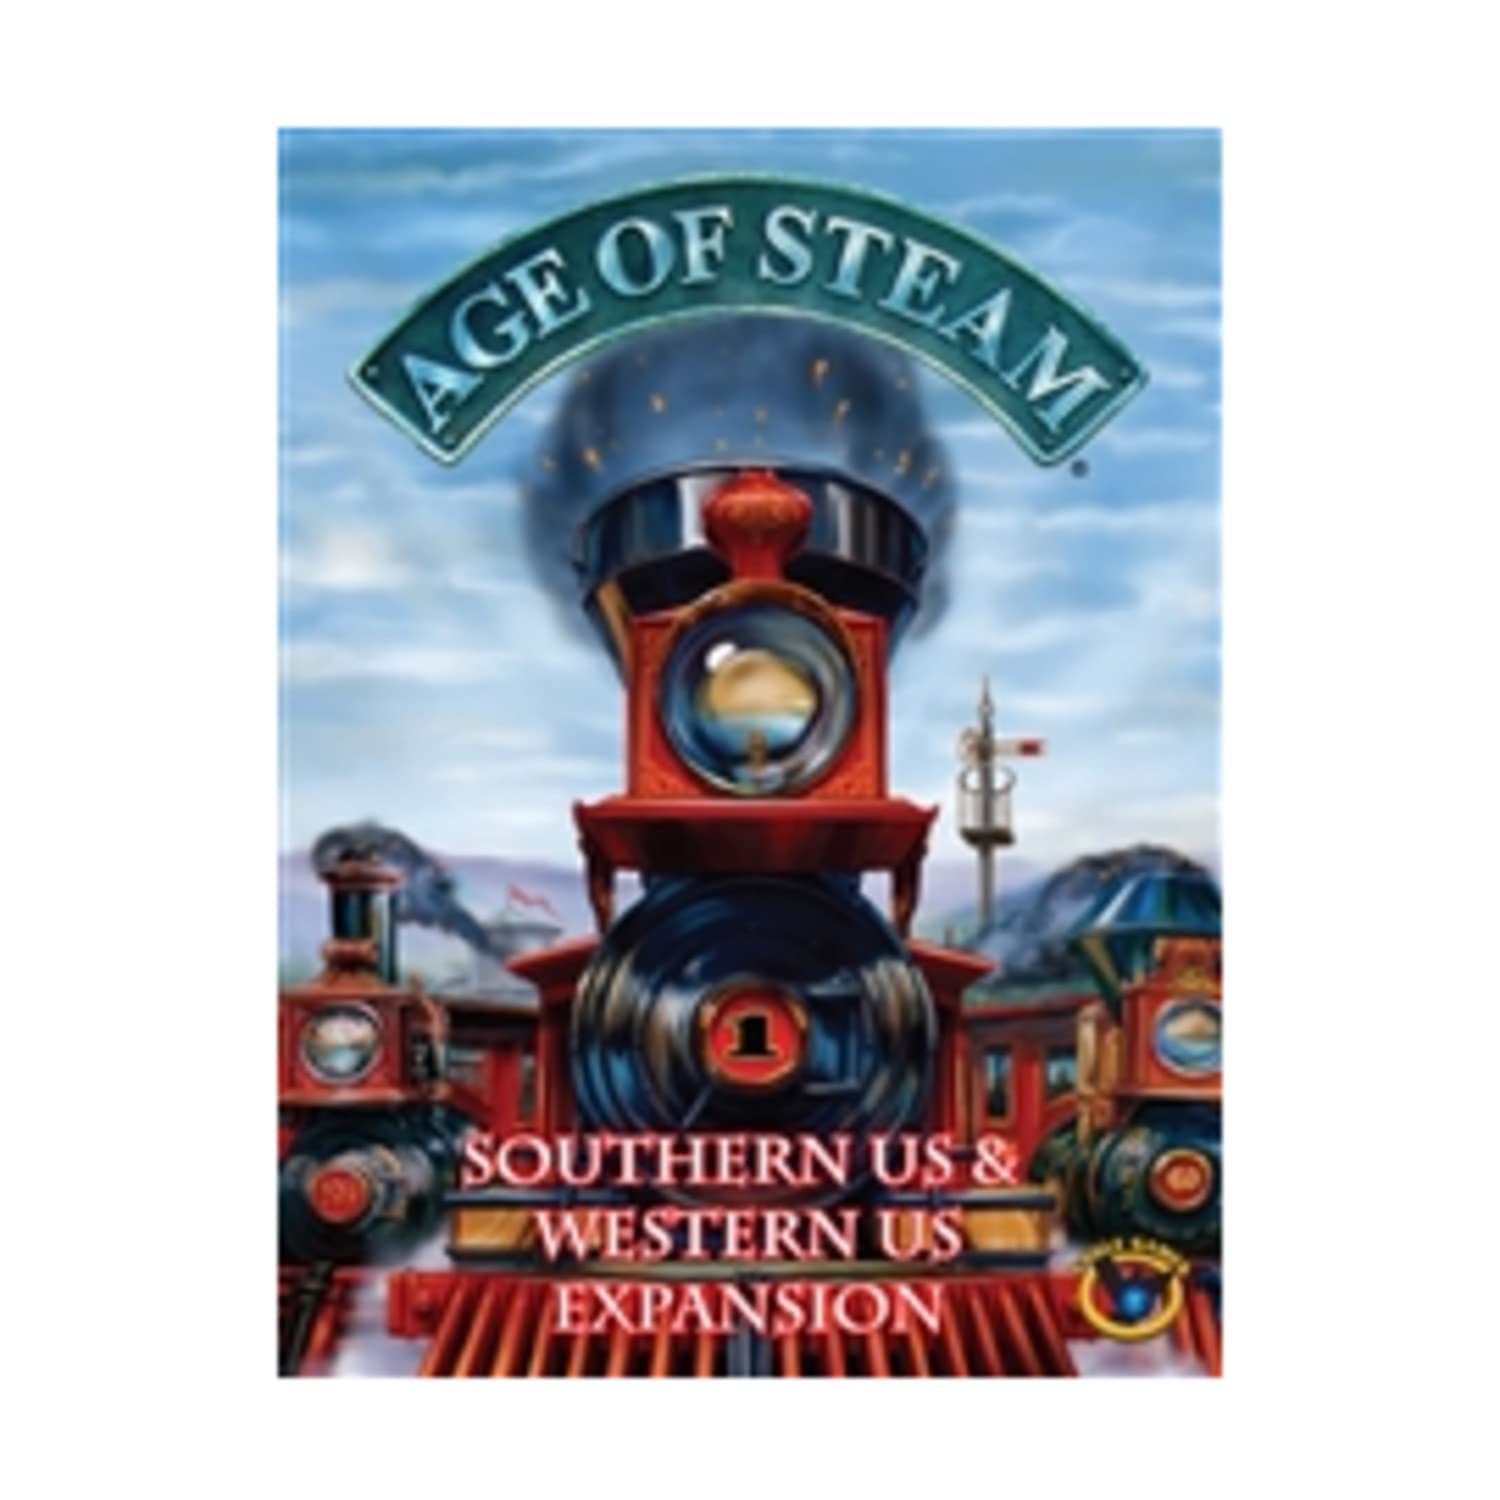 Age of Steam Southern US & Western US Expansion